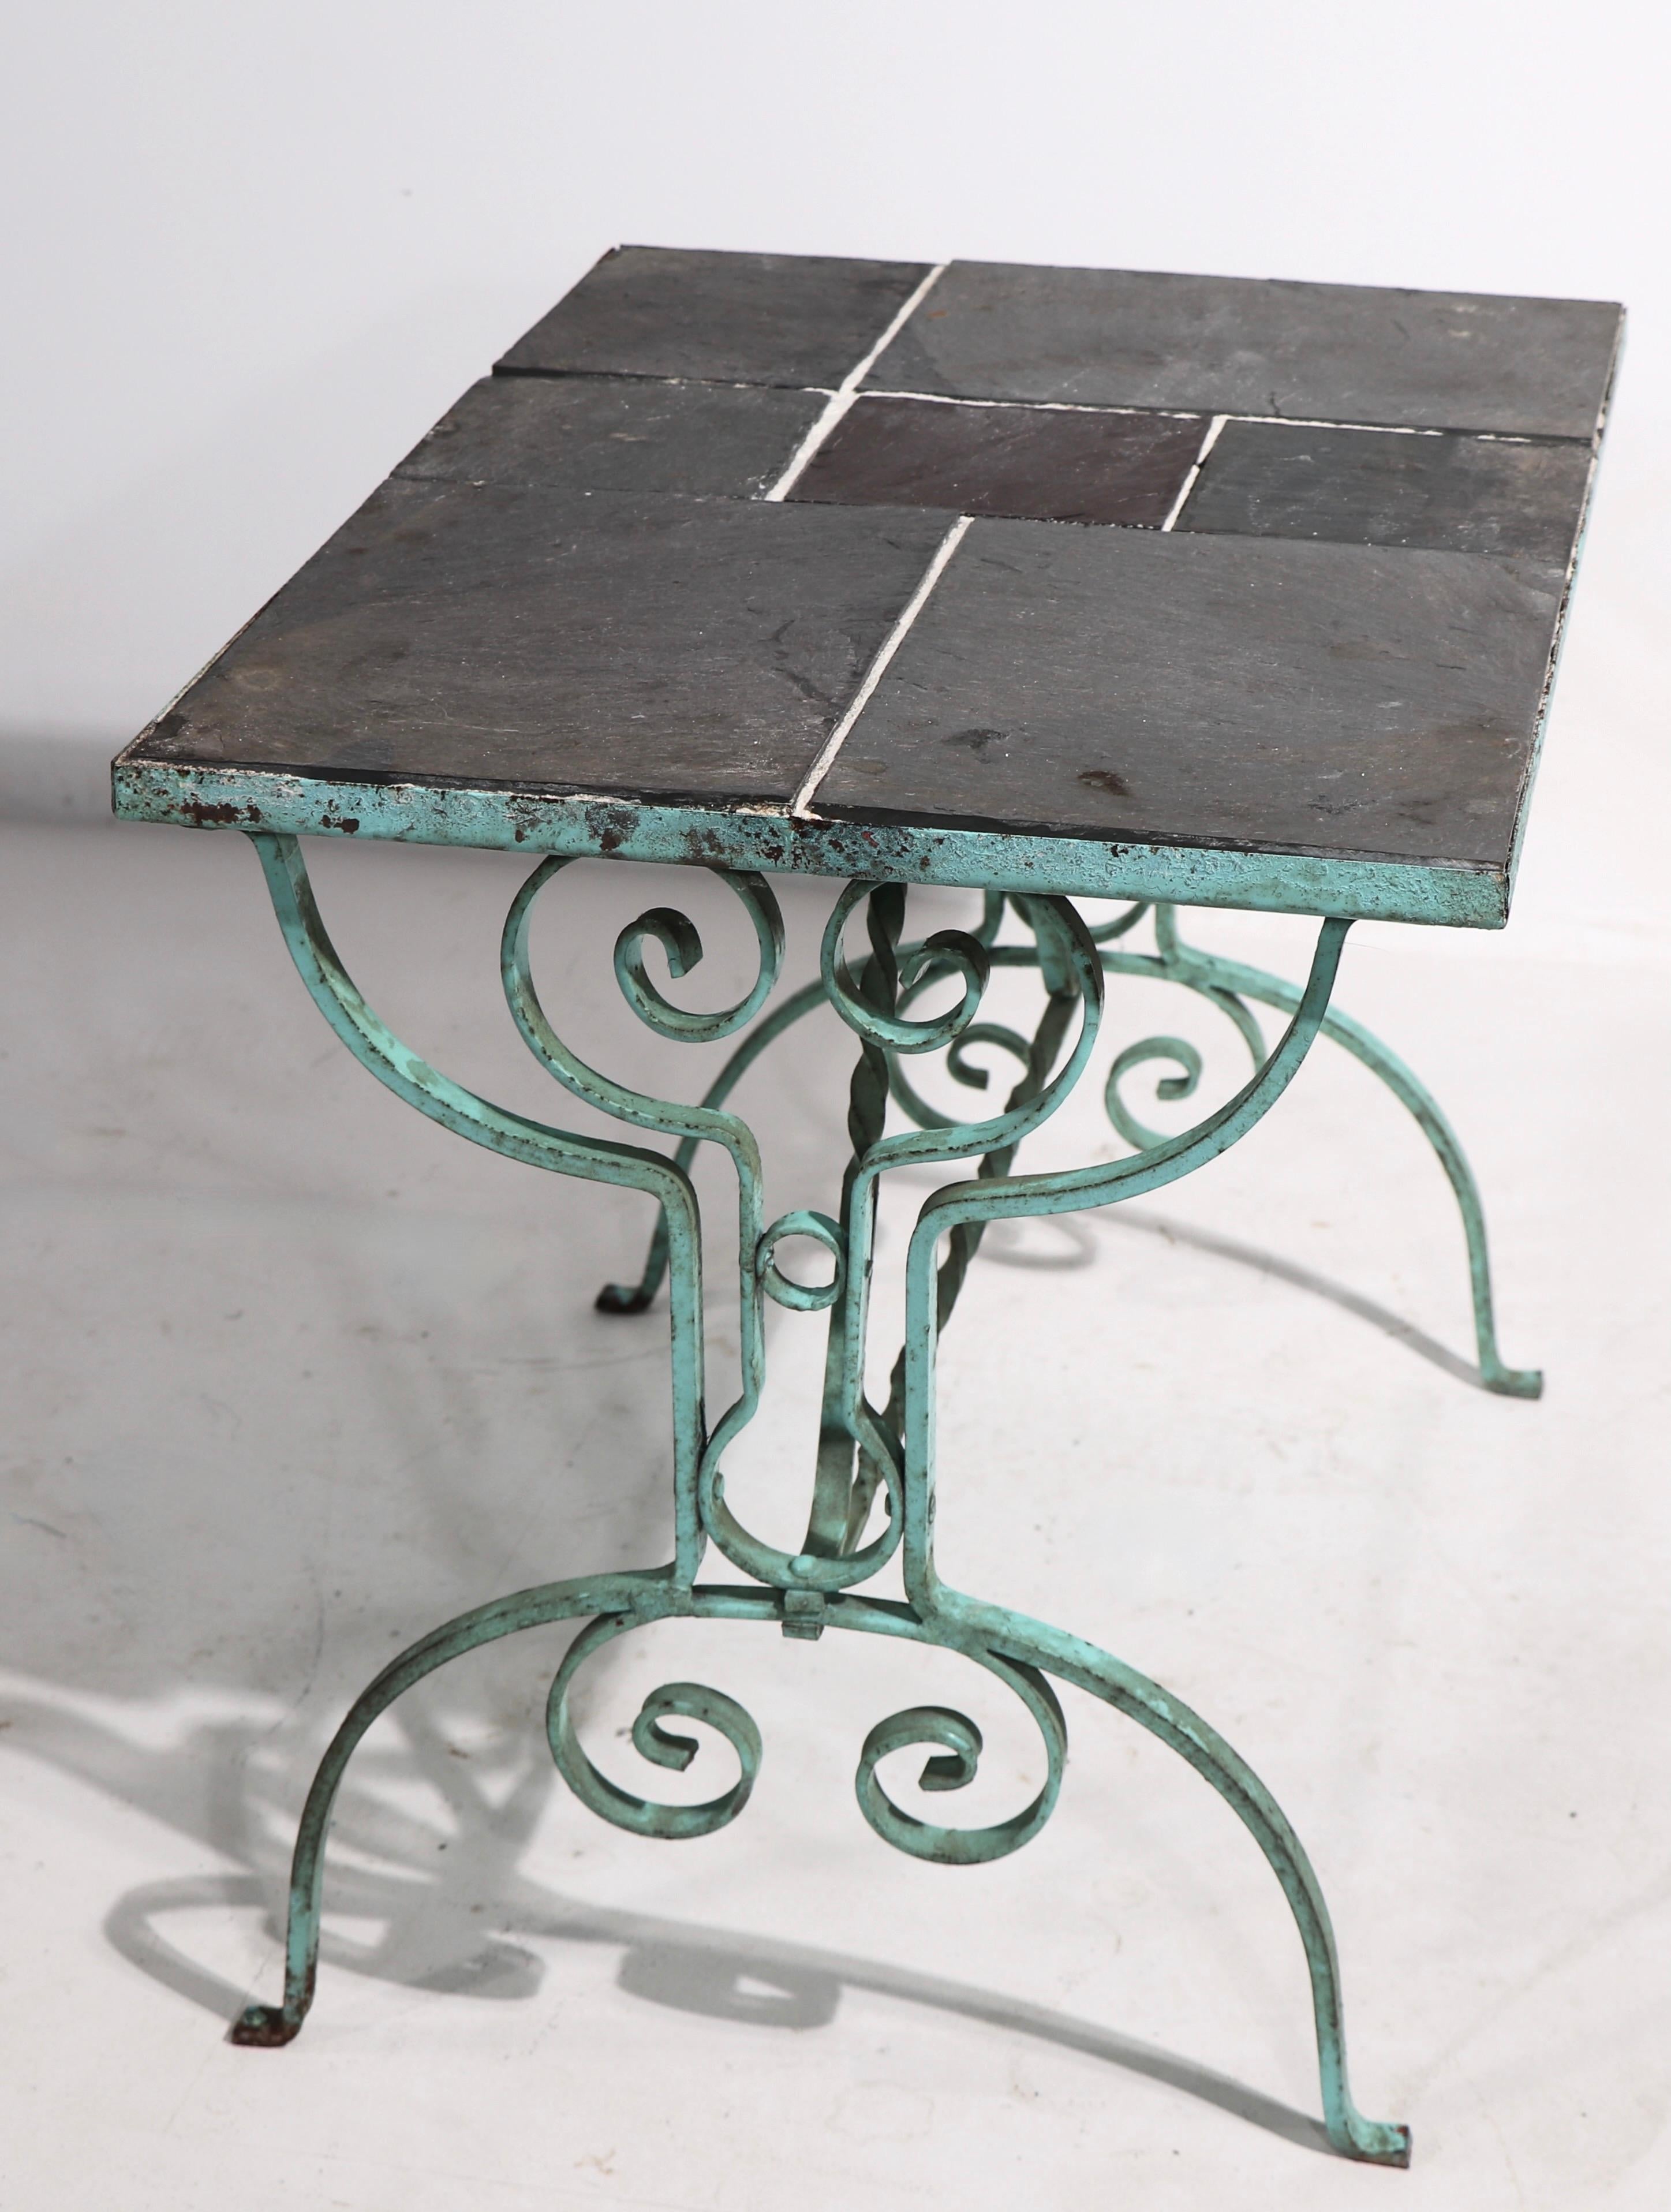 American Art Deco Arts and Crafts Wrought Iron and Slate Garden Patio Table